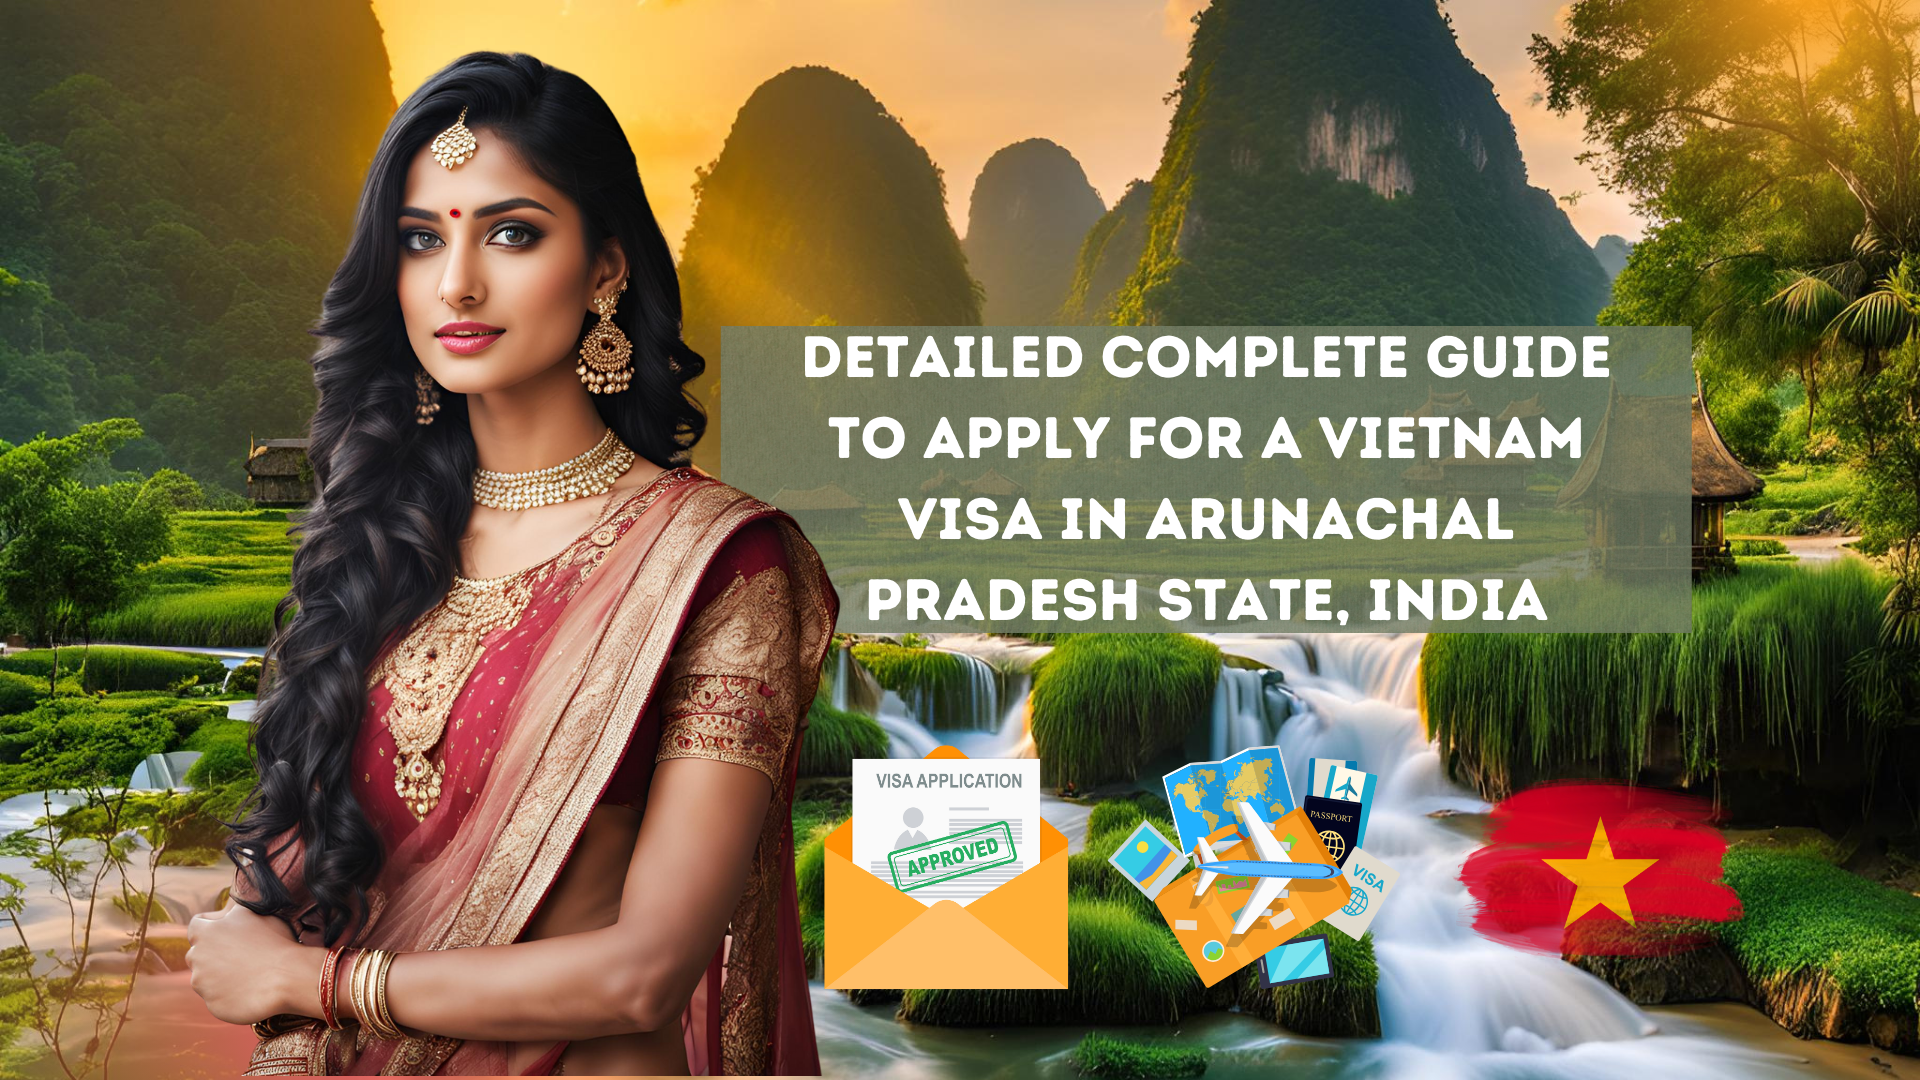 Detailed Complete Guide to Apply for a Vietnam Visa in Arunachal Pradesh State, India